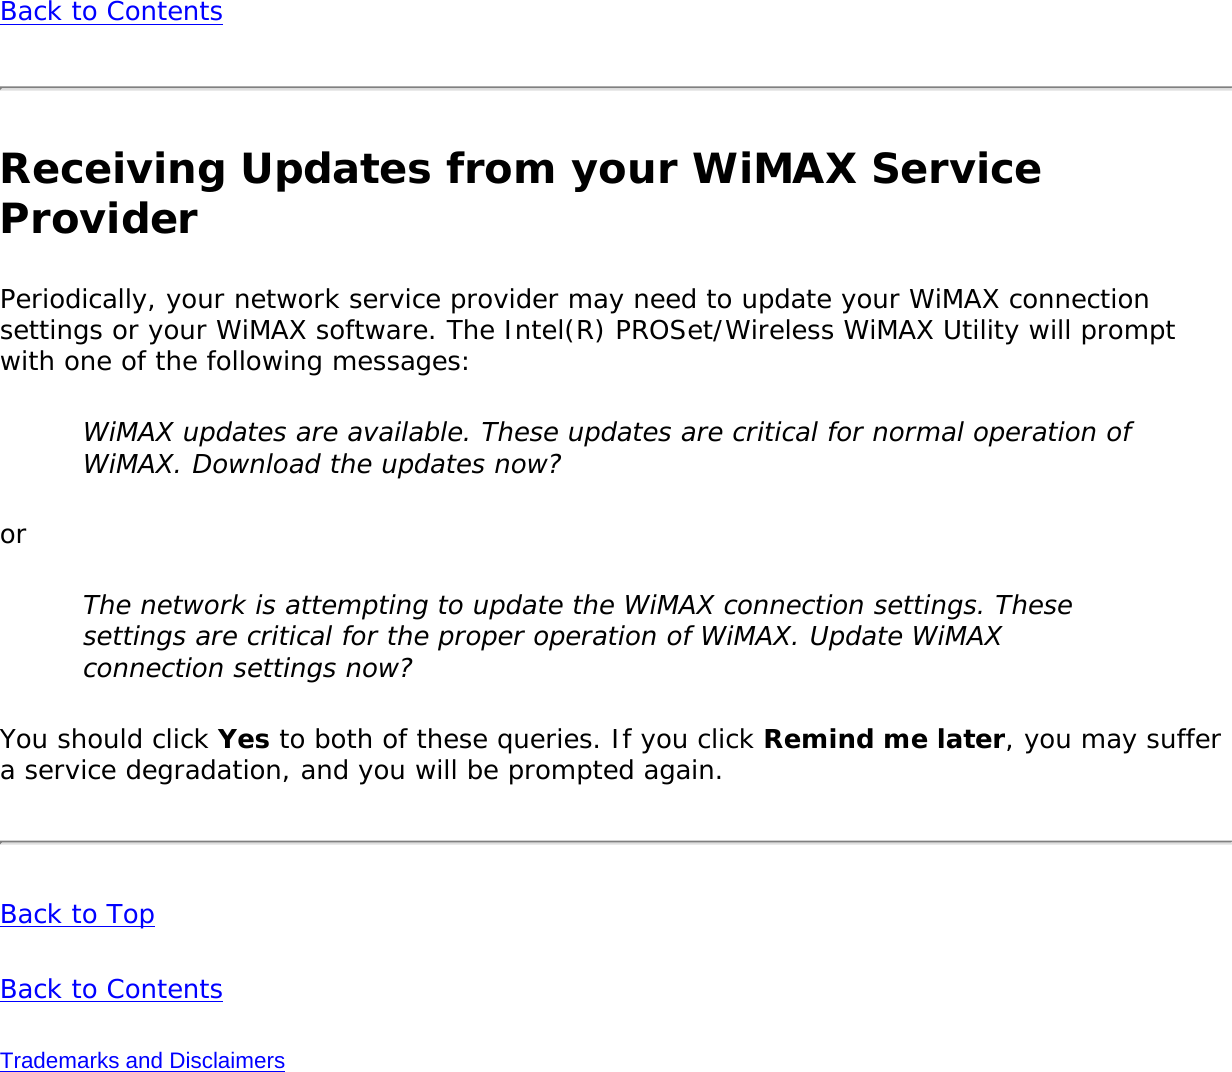 Back to ContentsReceiving Updates from your WiMAX Service ProviderPeriodically, your network service provider may need to update your WiMAX connection settings or your WiMAX software. The Intel(R) PROSet/Wireless WiMAX Utility will prompt with one of the following messages:WiMAX updates are available. These updates are critical for normal operation of WiMAX. Download the updates now?orThe network is attempting to update the WiMAX connection settings. These settings are critical for the proper operation of WiMAX. Update WiMAX connection settings now?You should click Yes to both of these queries. If you click Remind me later, you may suffer a service degradation, and you will be prompted again. Back to TopBack to ContentsTrademarks and Disclaimers